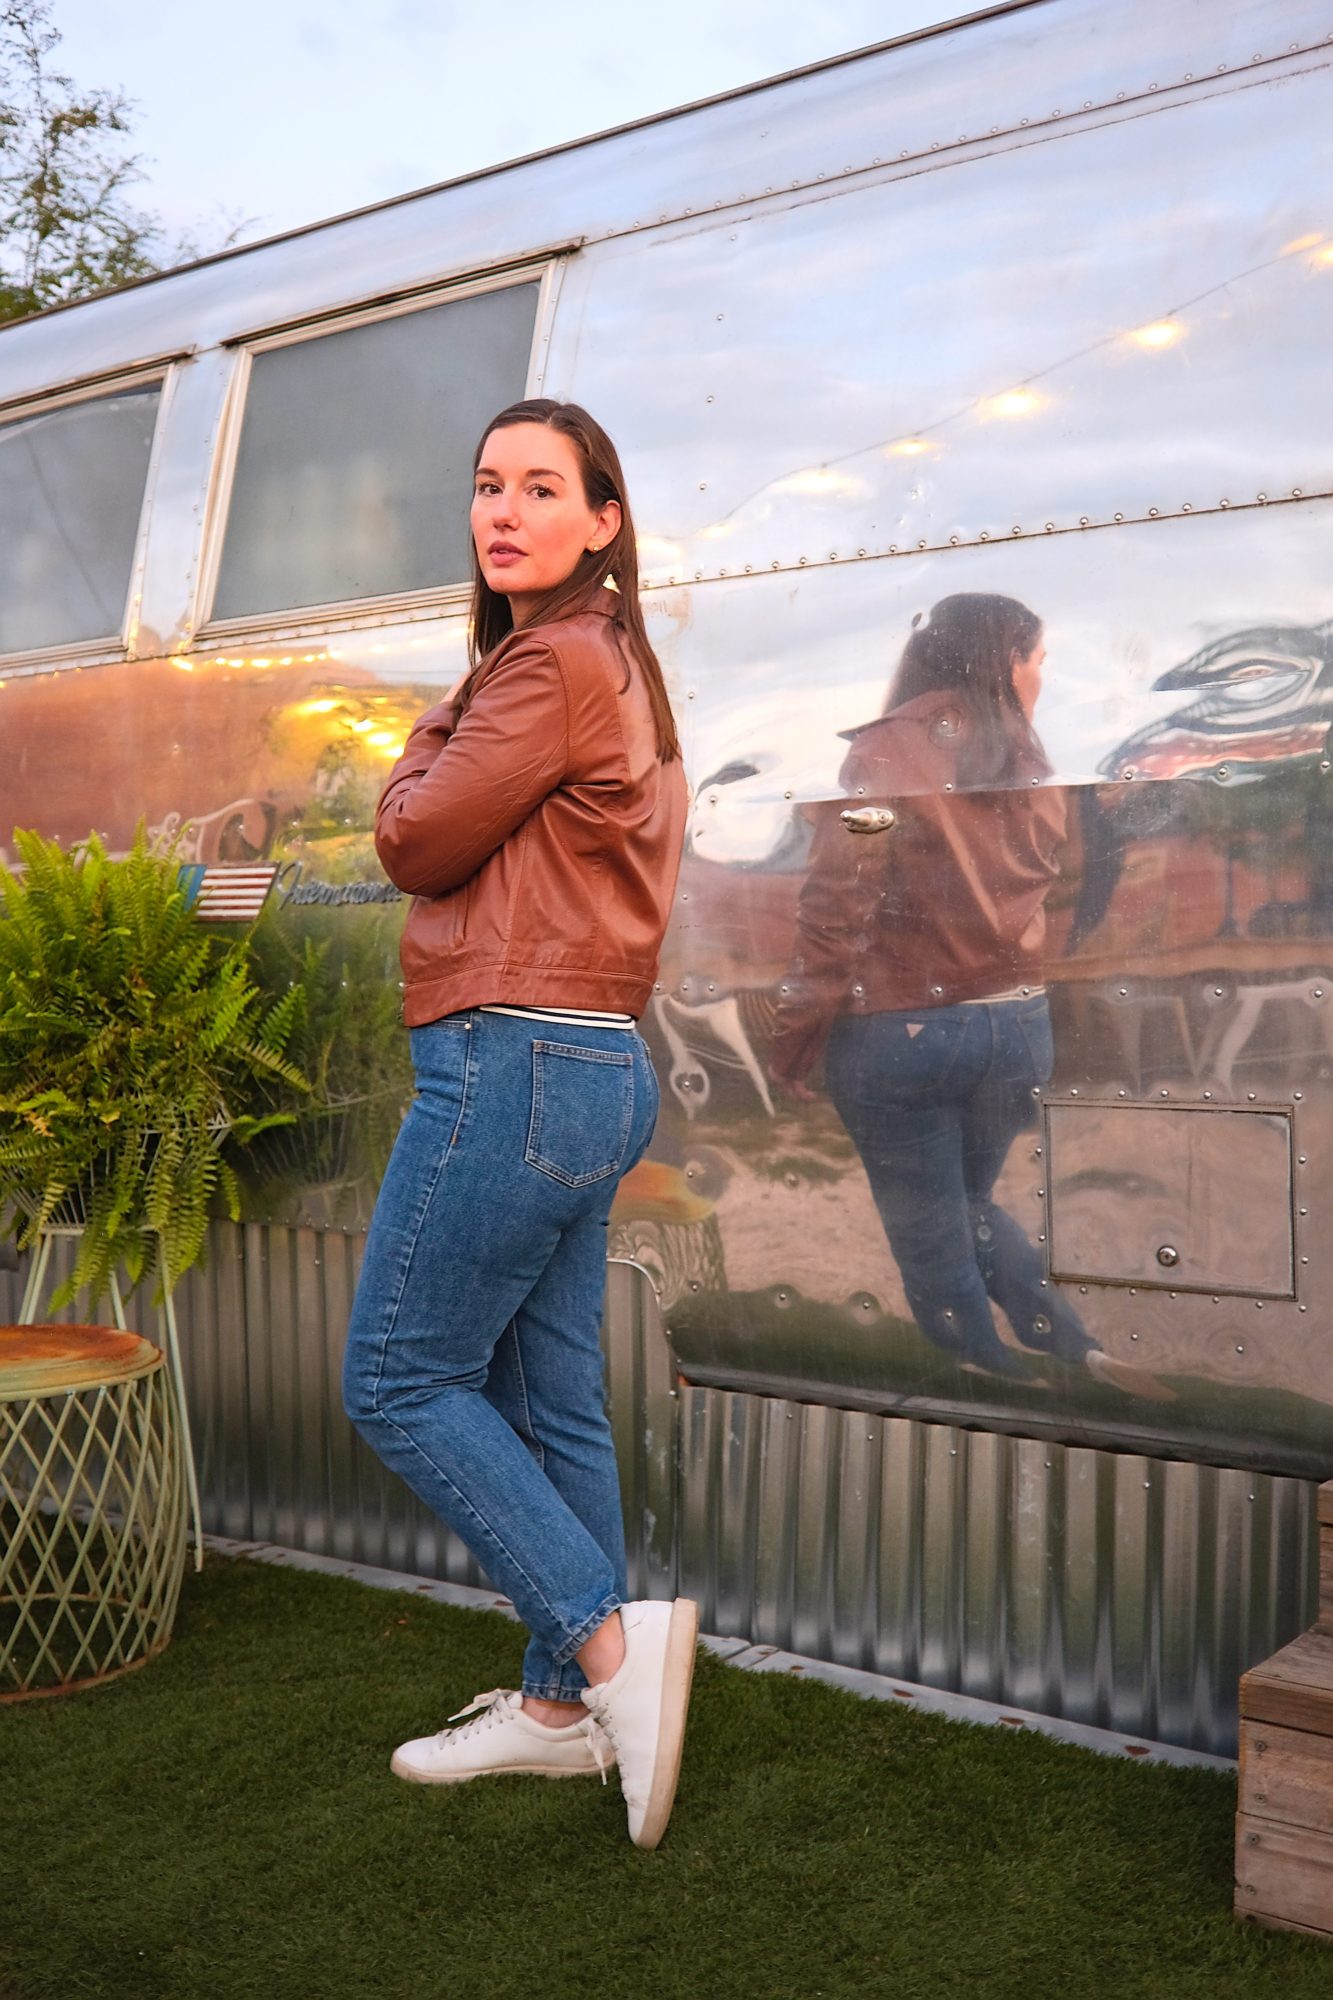 Alyssa wears the Maha Leather Jacket from ABLE in front of an Airstream